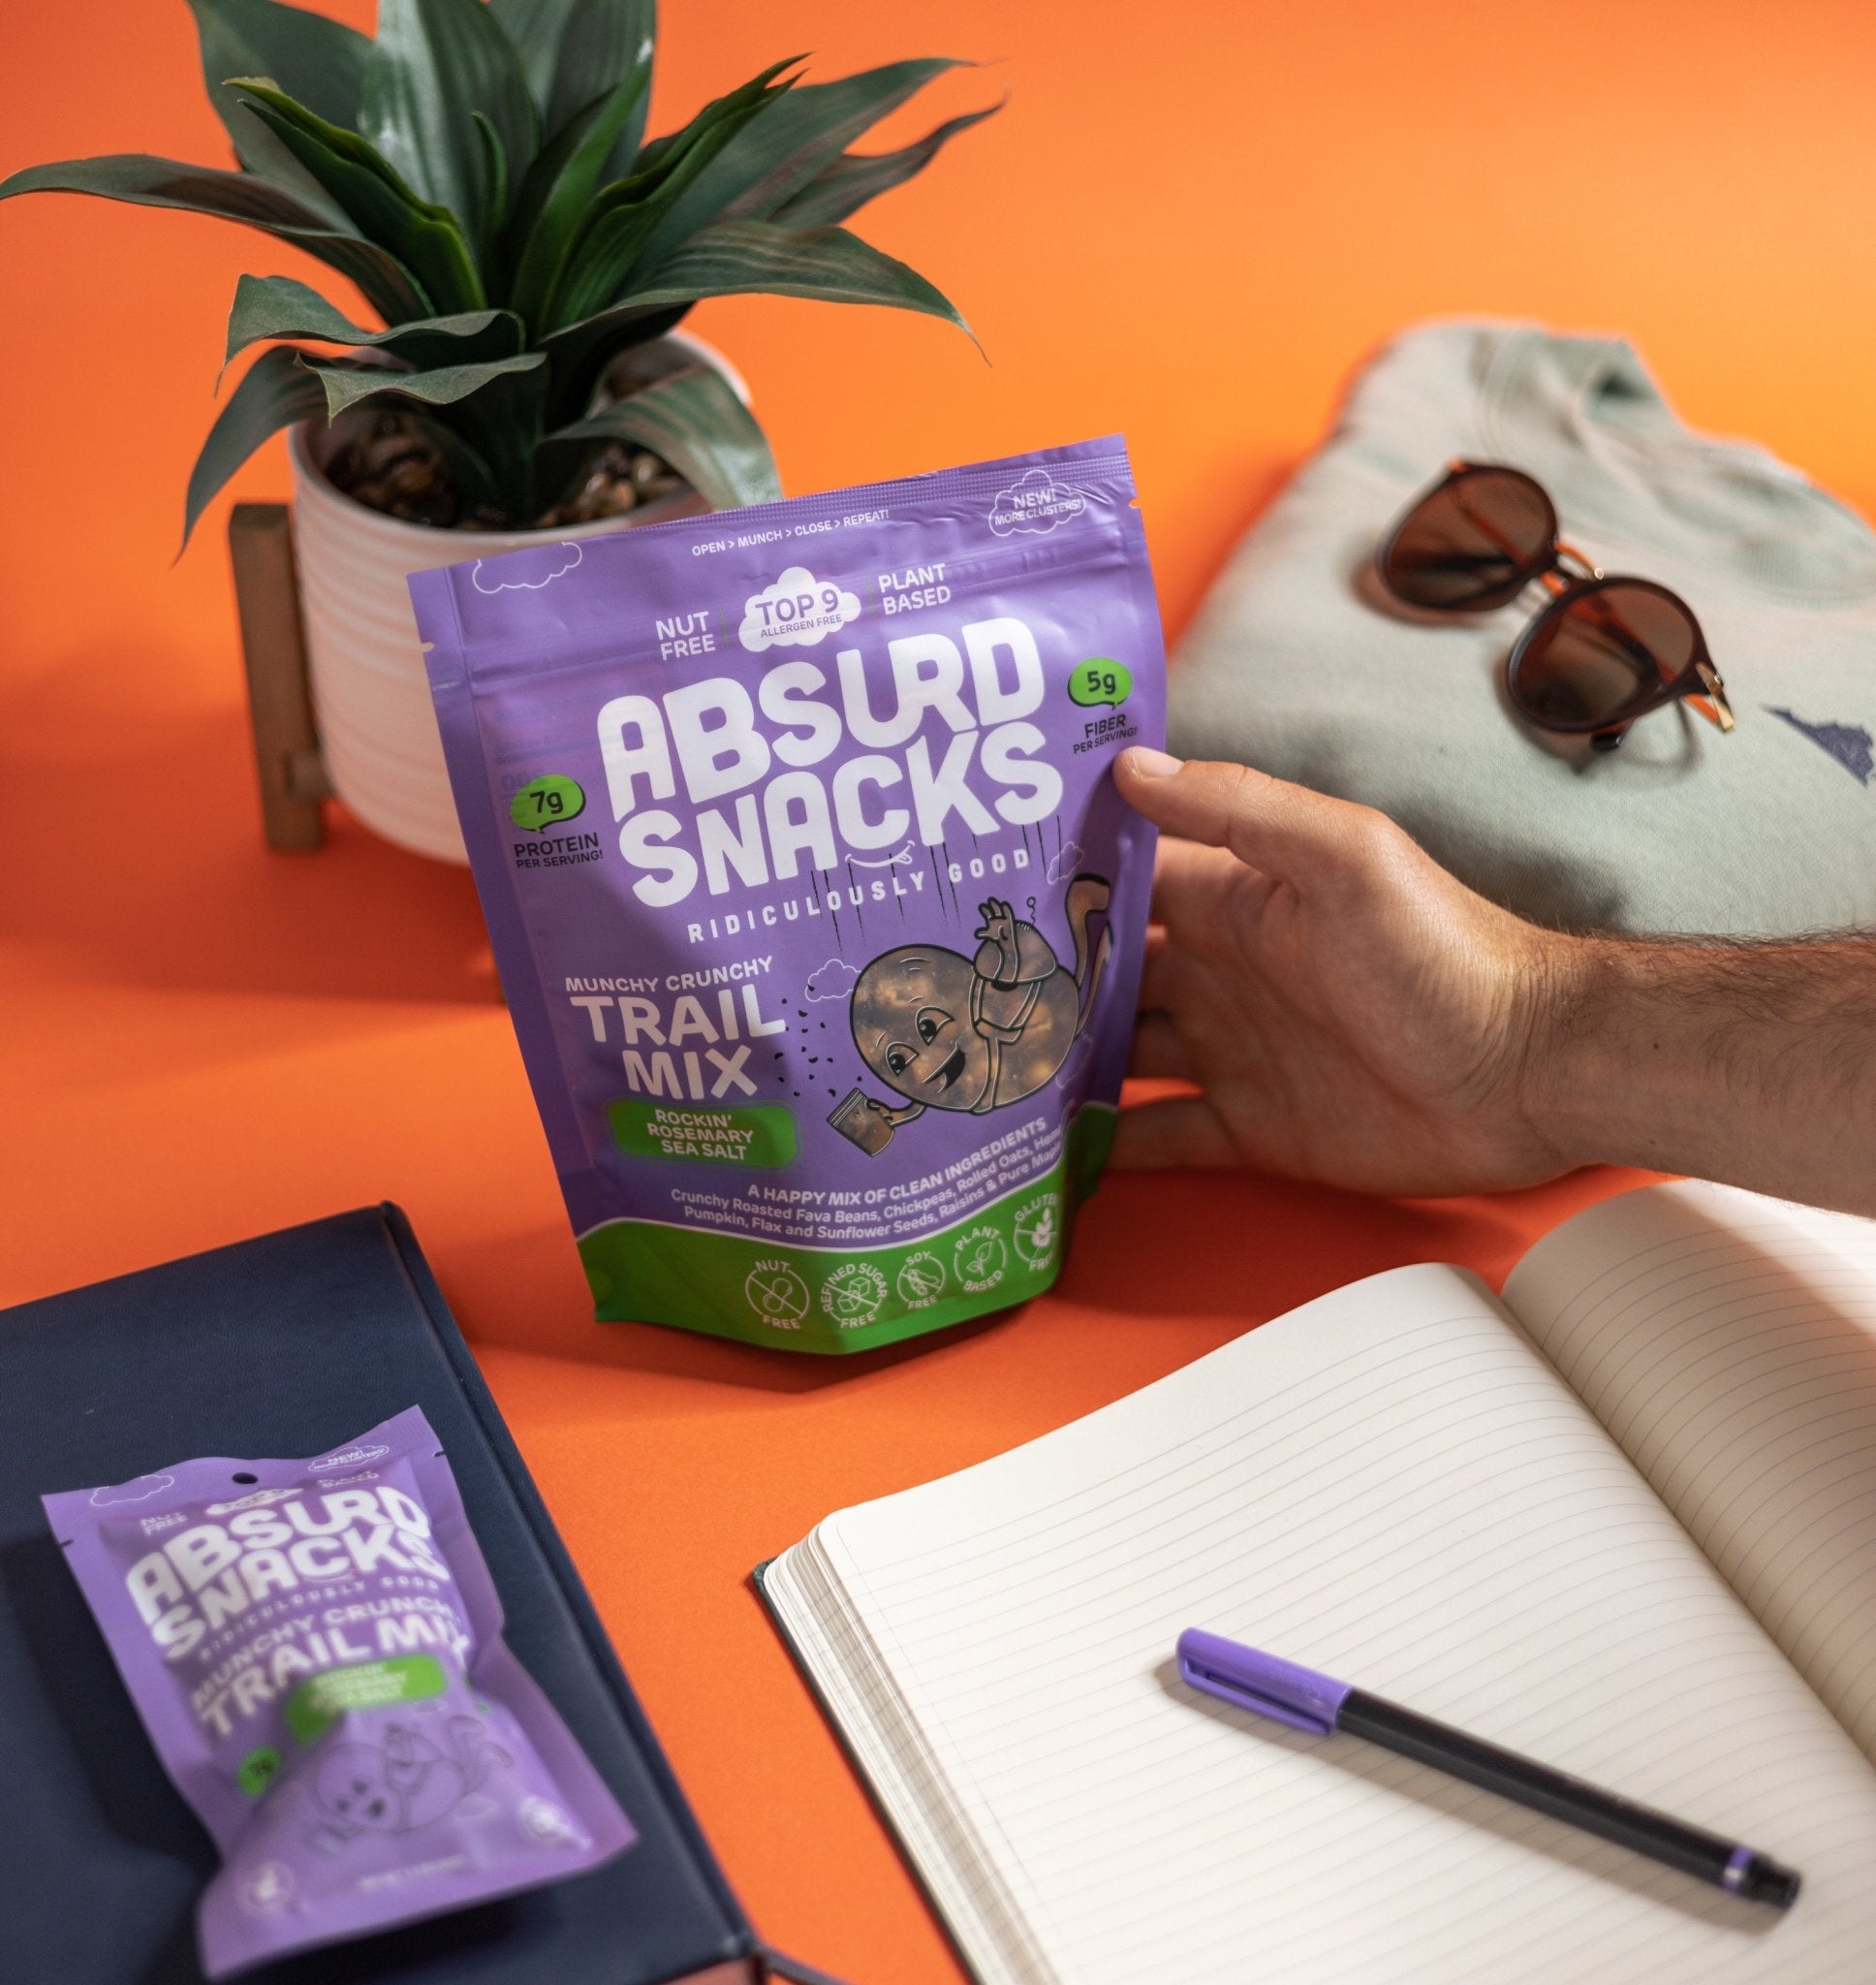 Back to School Allergen-Free Snacking with Absurd Snacks! - Absurd Snacks